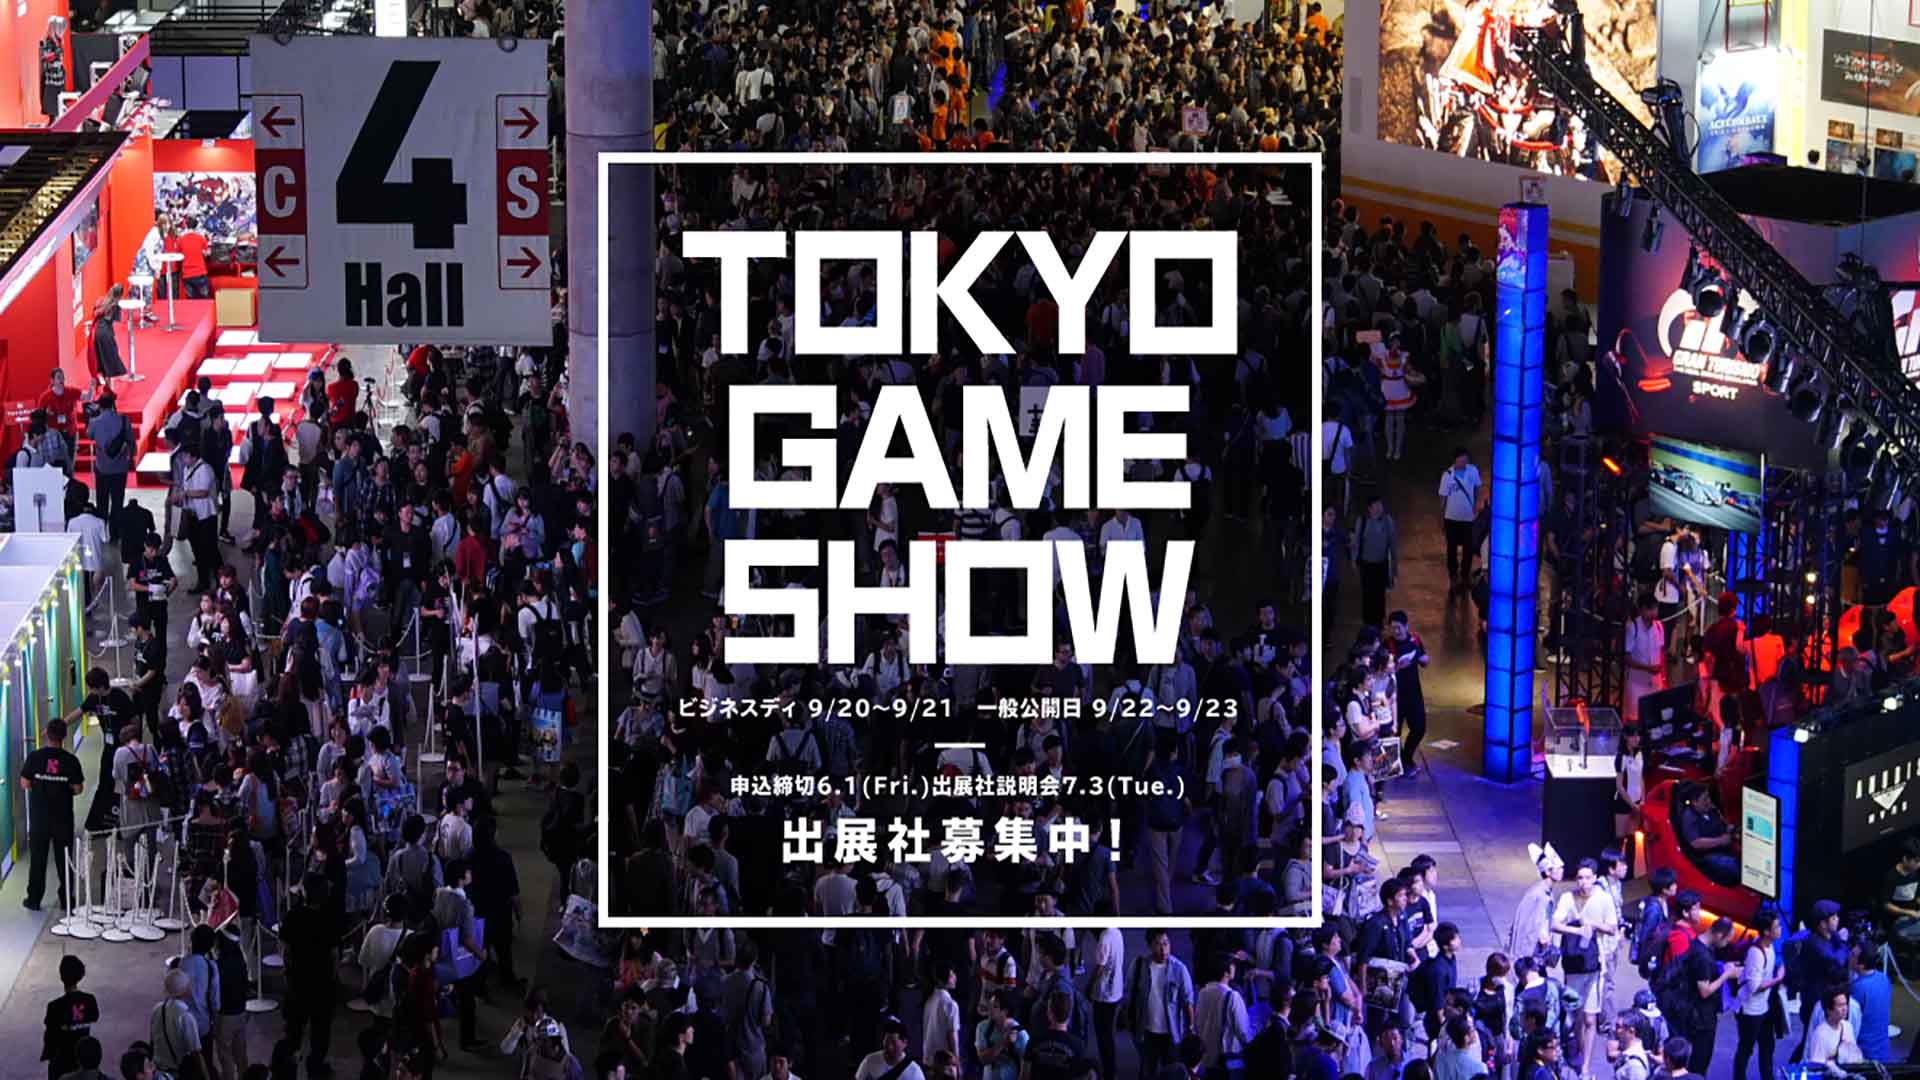 A game show is. Tokyo game show. Токио гейм шоу. Game show. Tokyo game show 2023.